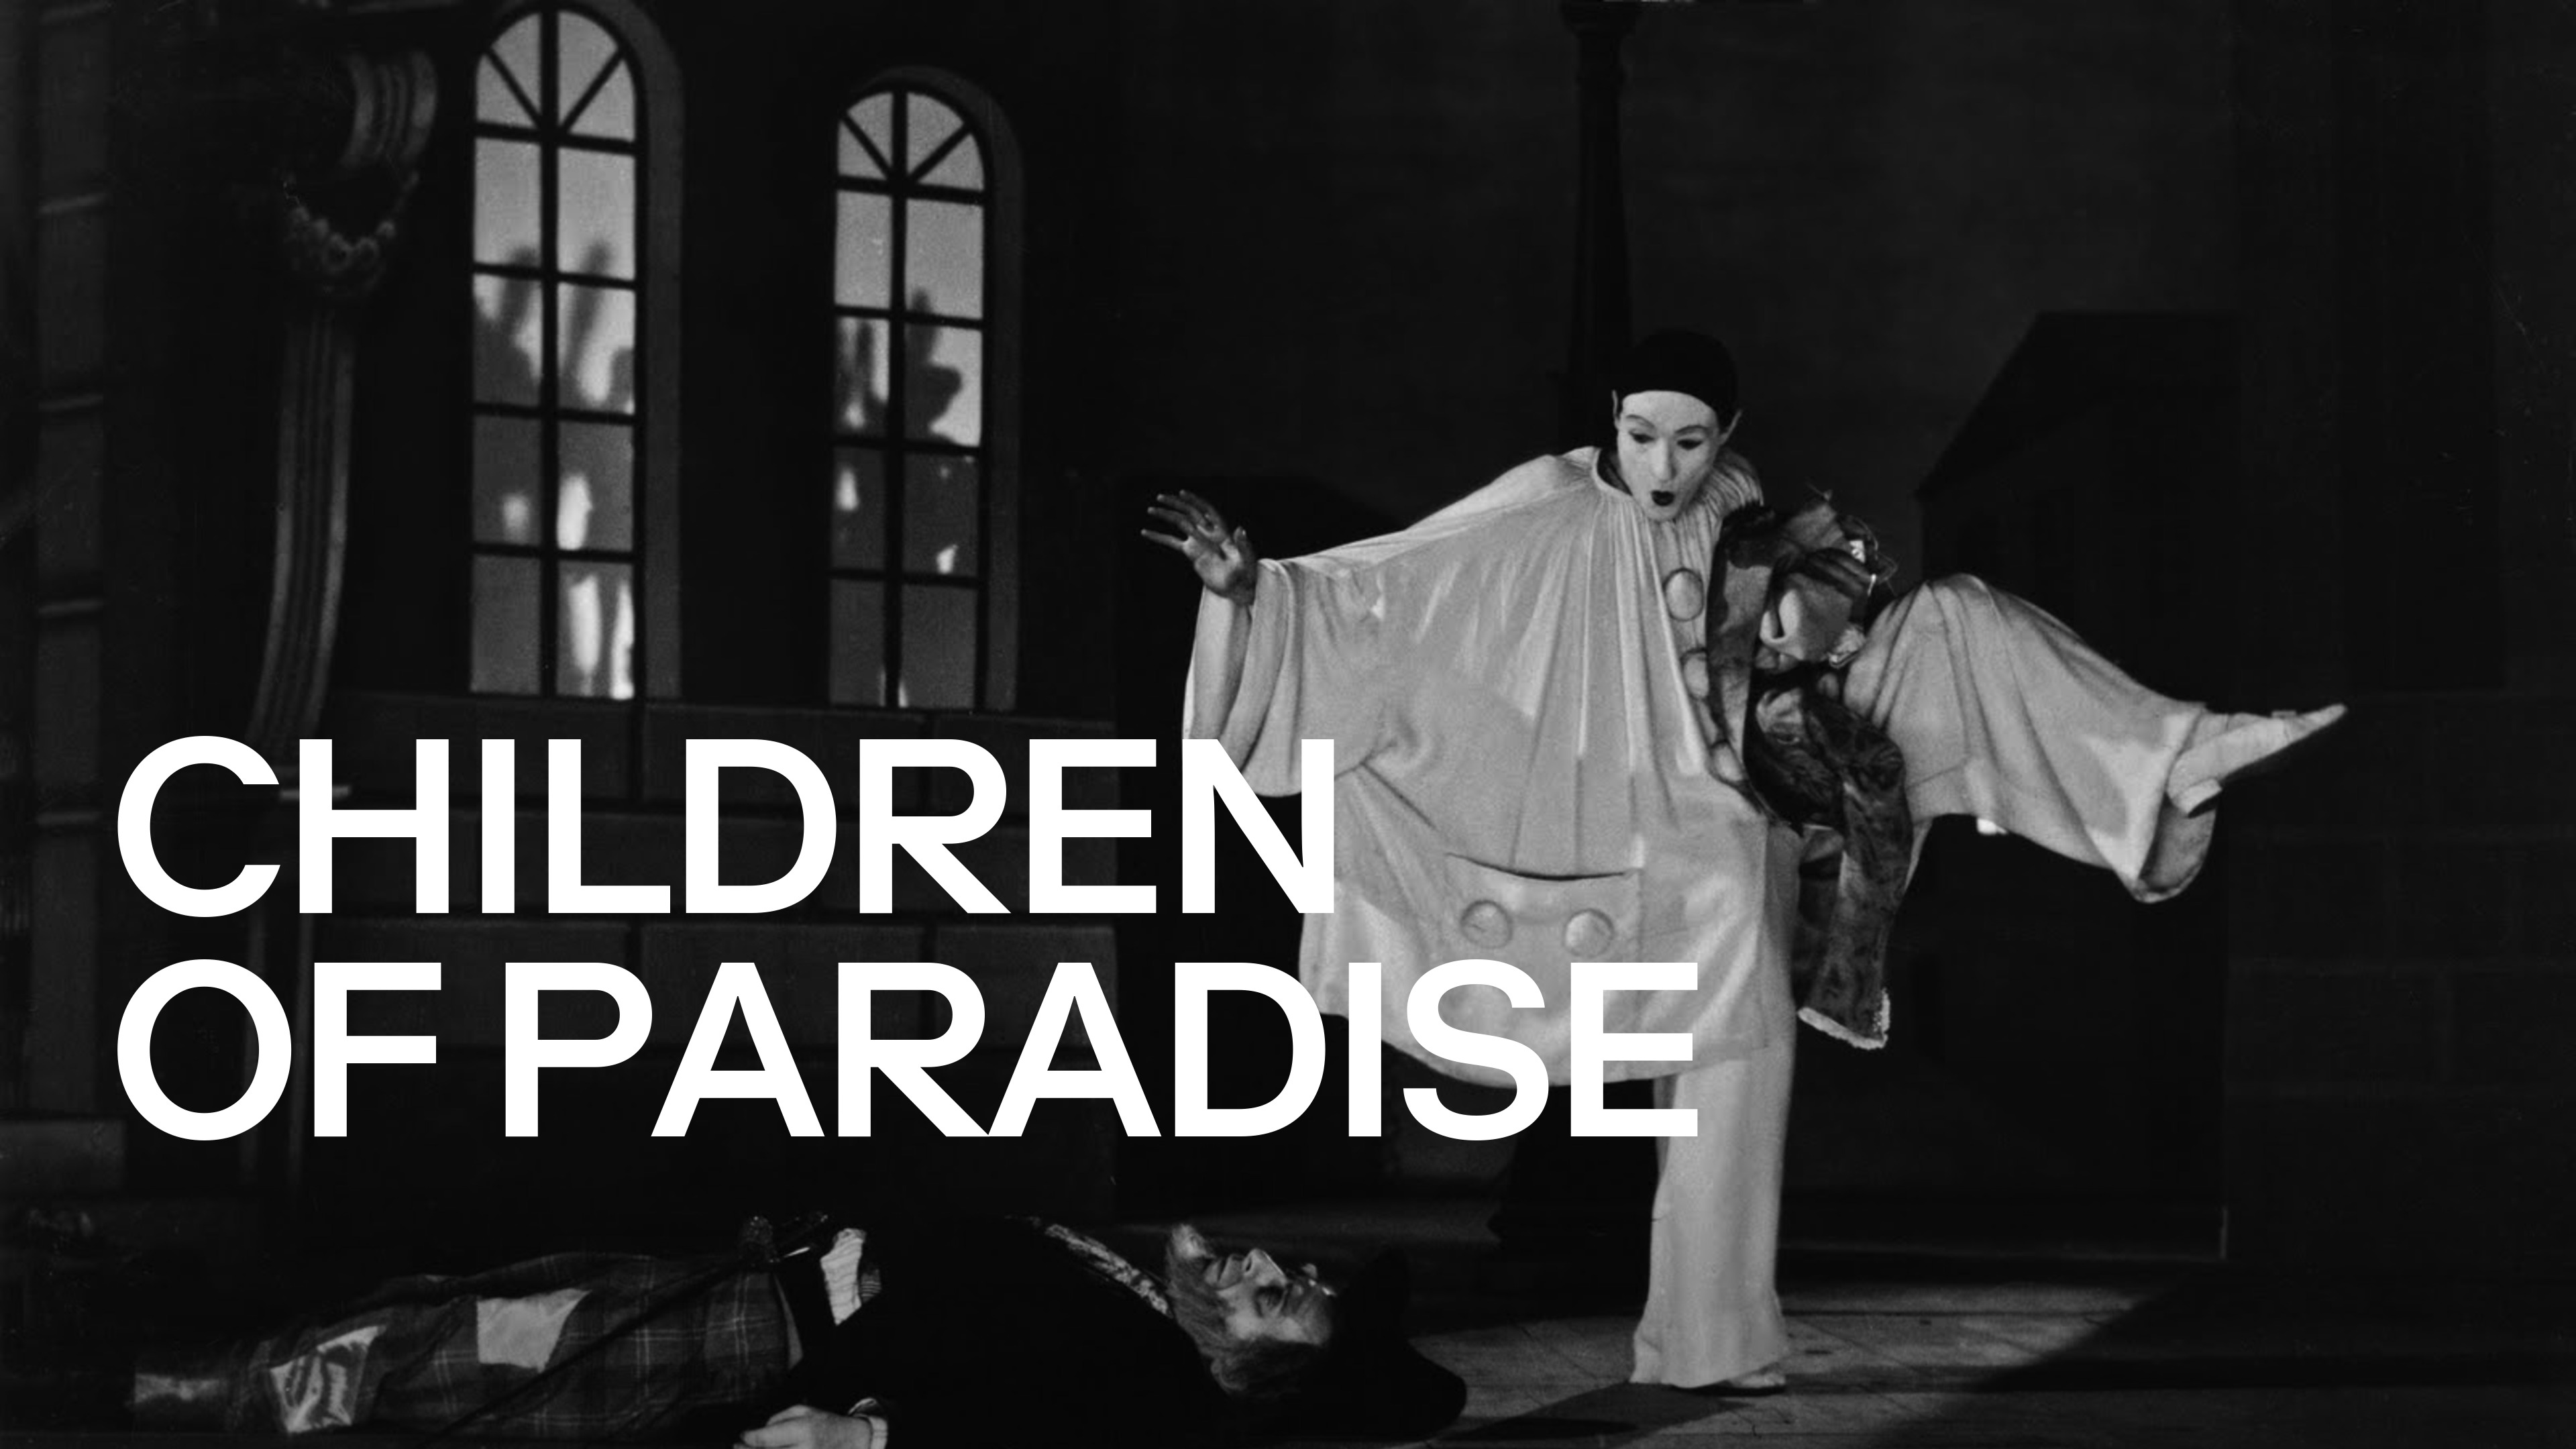 38-facts-about-the-movie-children-of-paradise